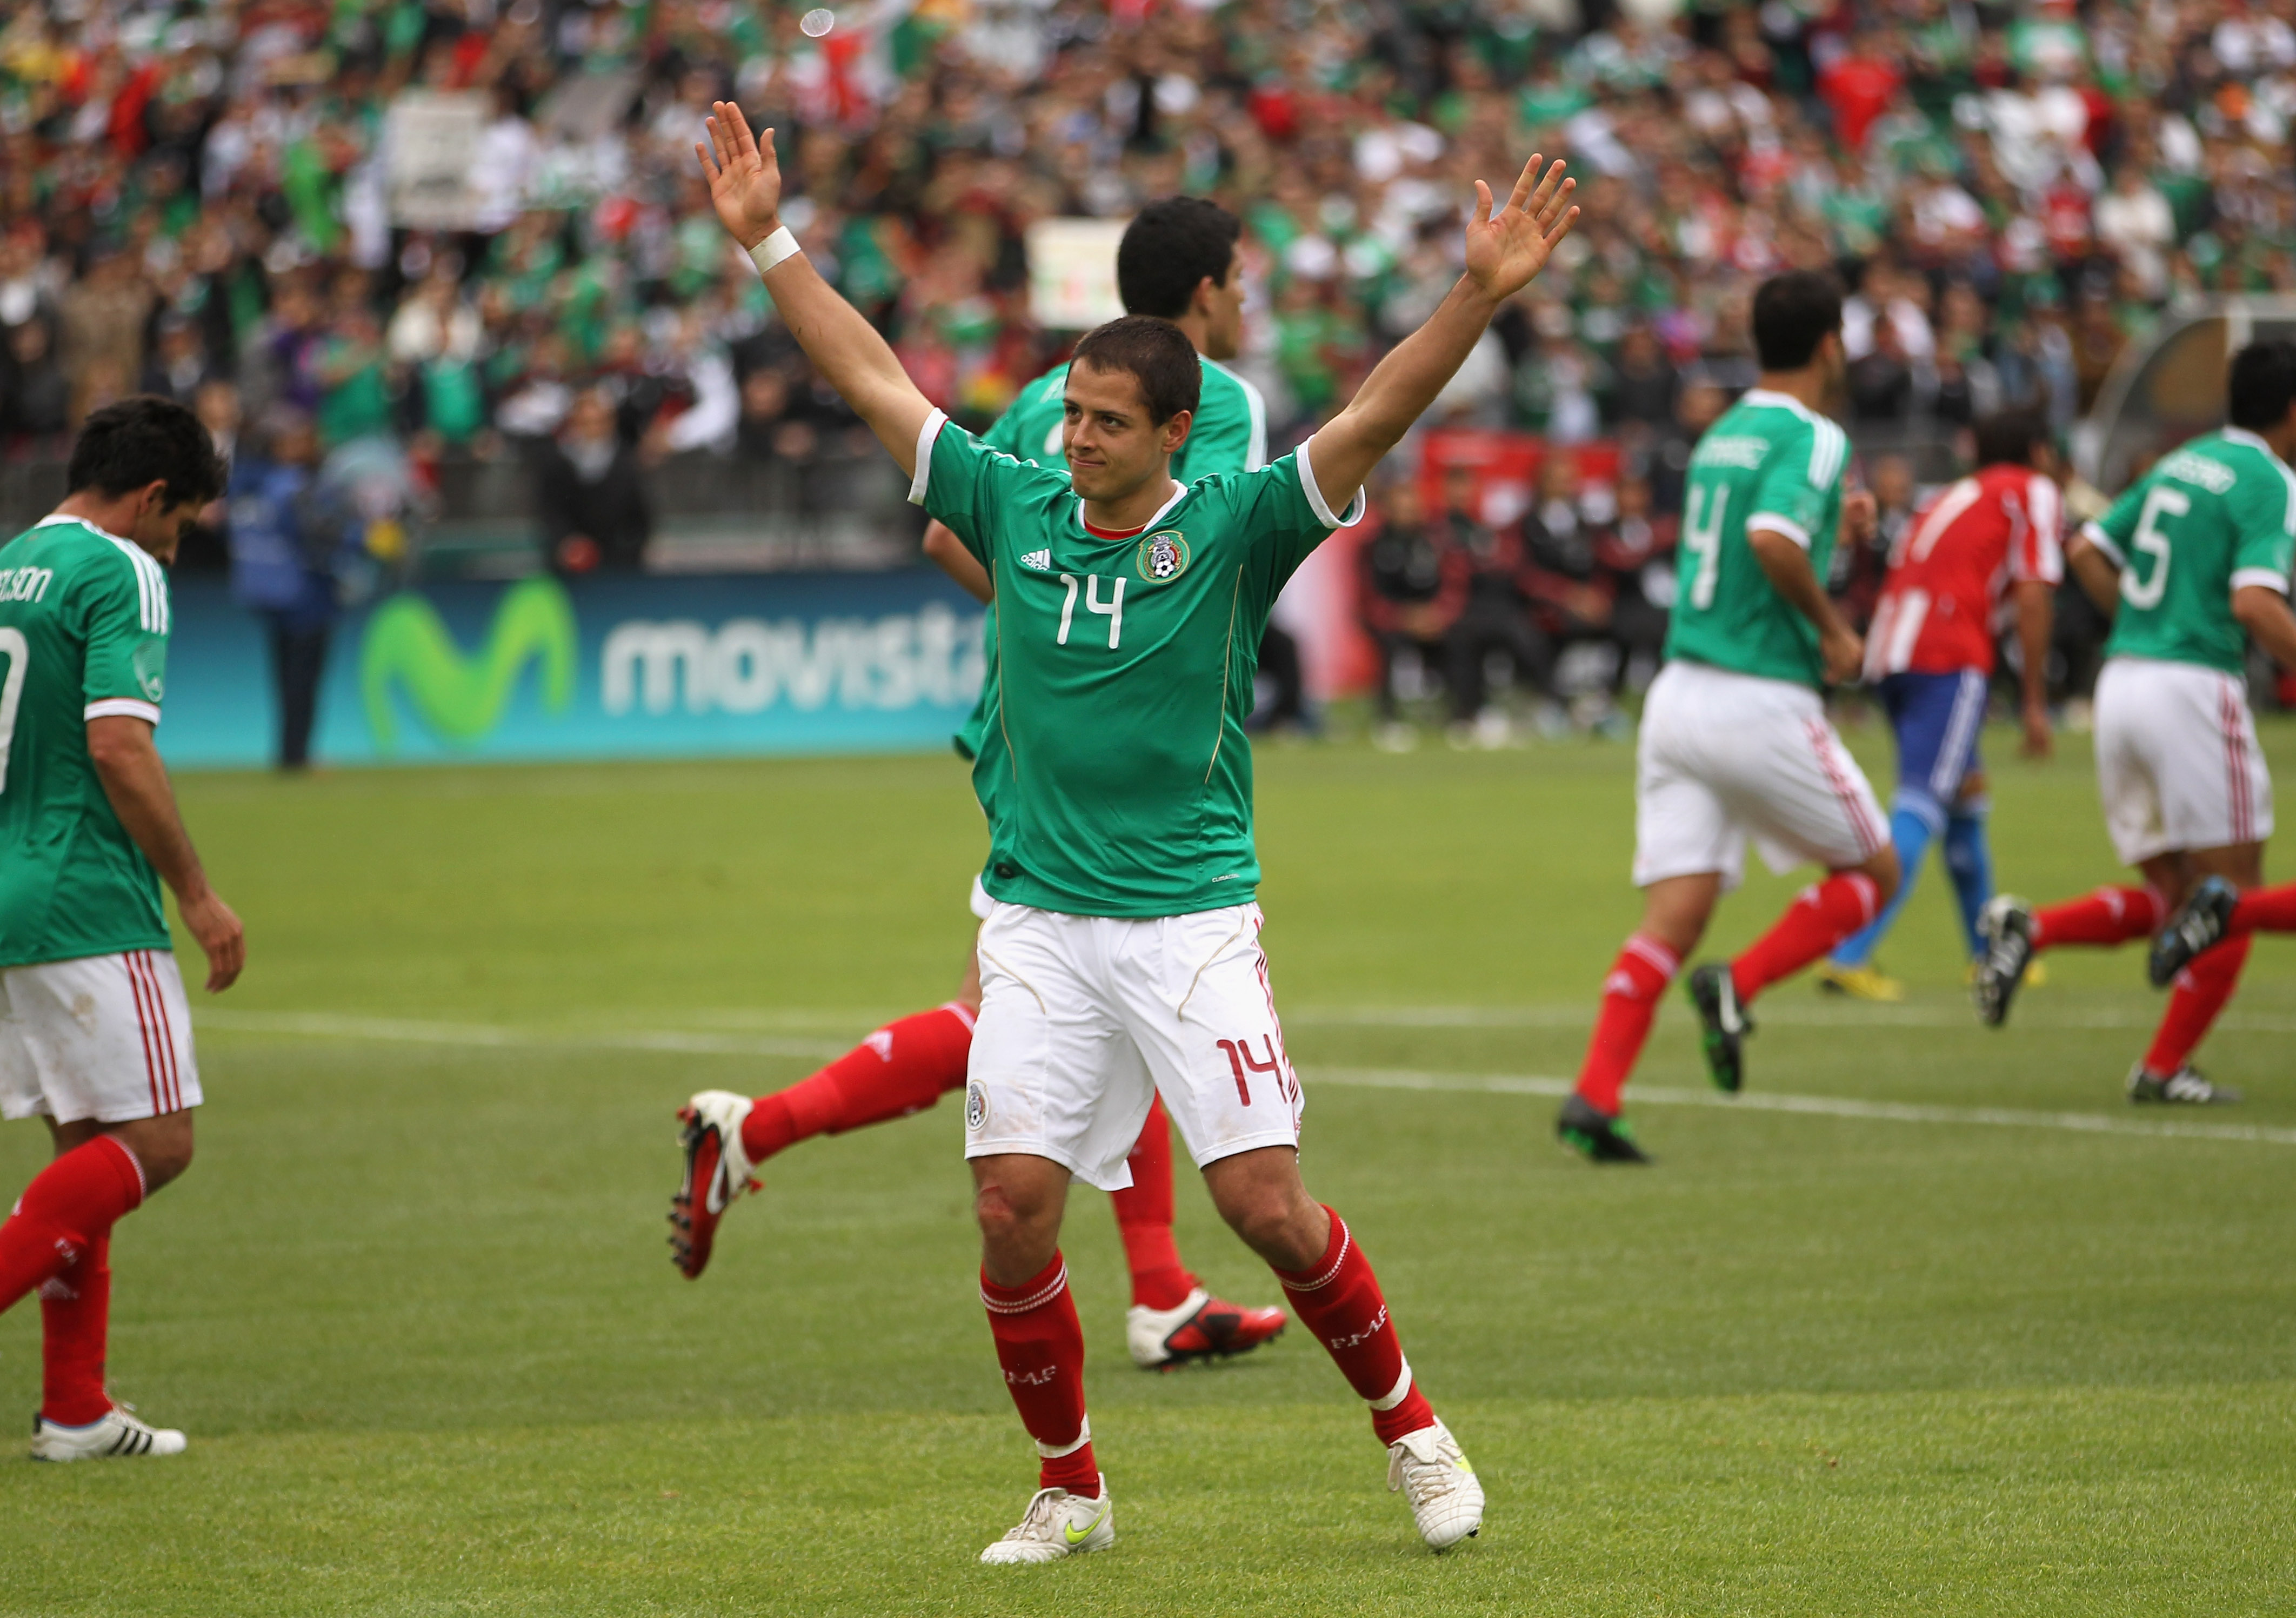 OAKLAND, CA - MARCH 26:  Javier 'Chicharito' Hernandez of Mexico waves to the crowd after he scored his second goal during their international friendly match against Paraguay at Oakland-Alameda County Coliseum on March 26, 2011 in Oakland, California.  (P